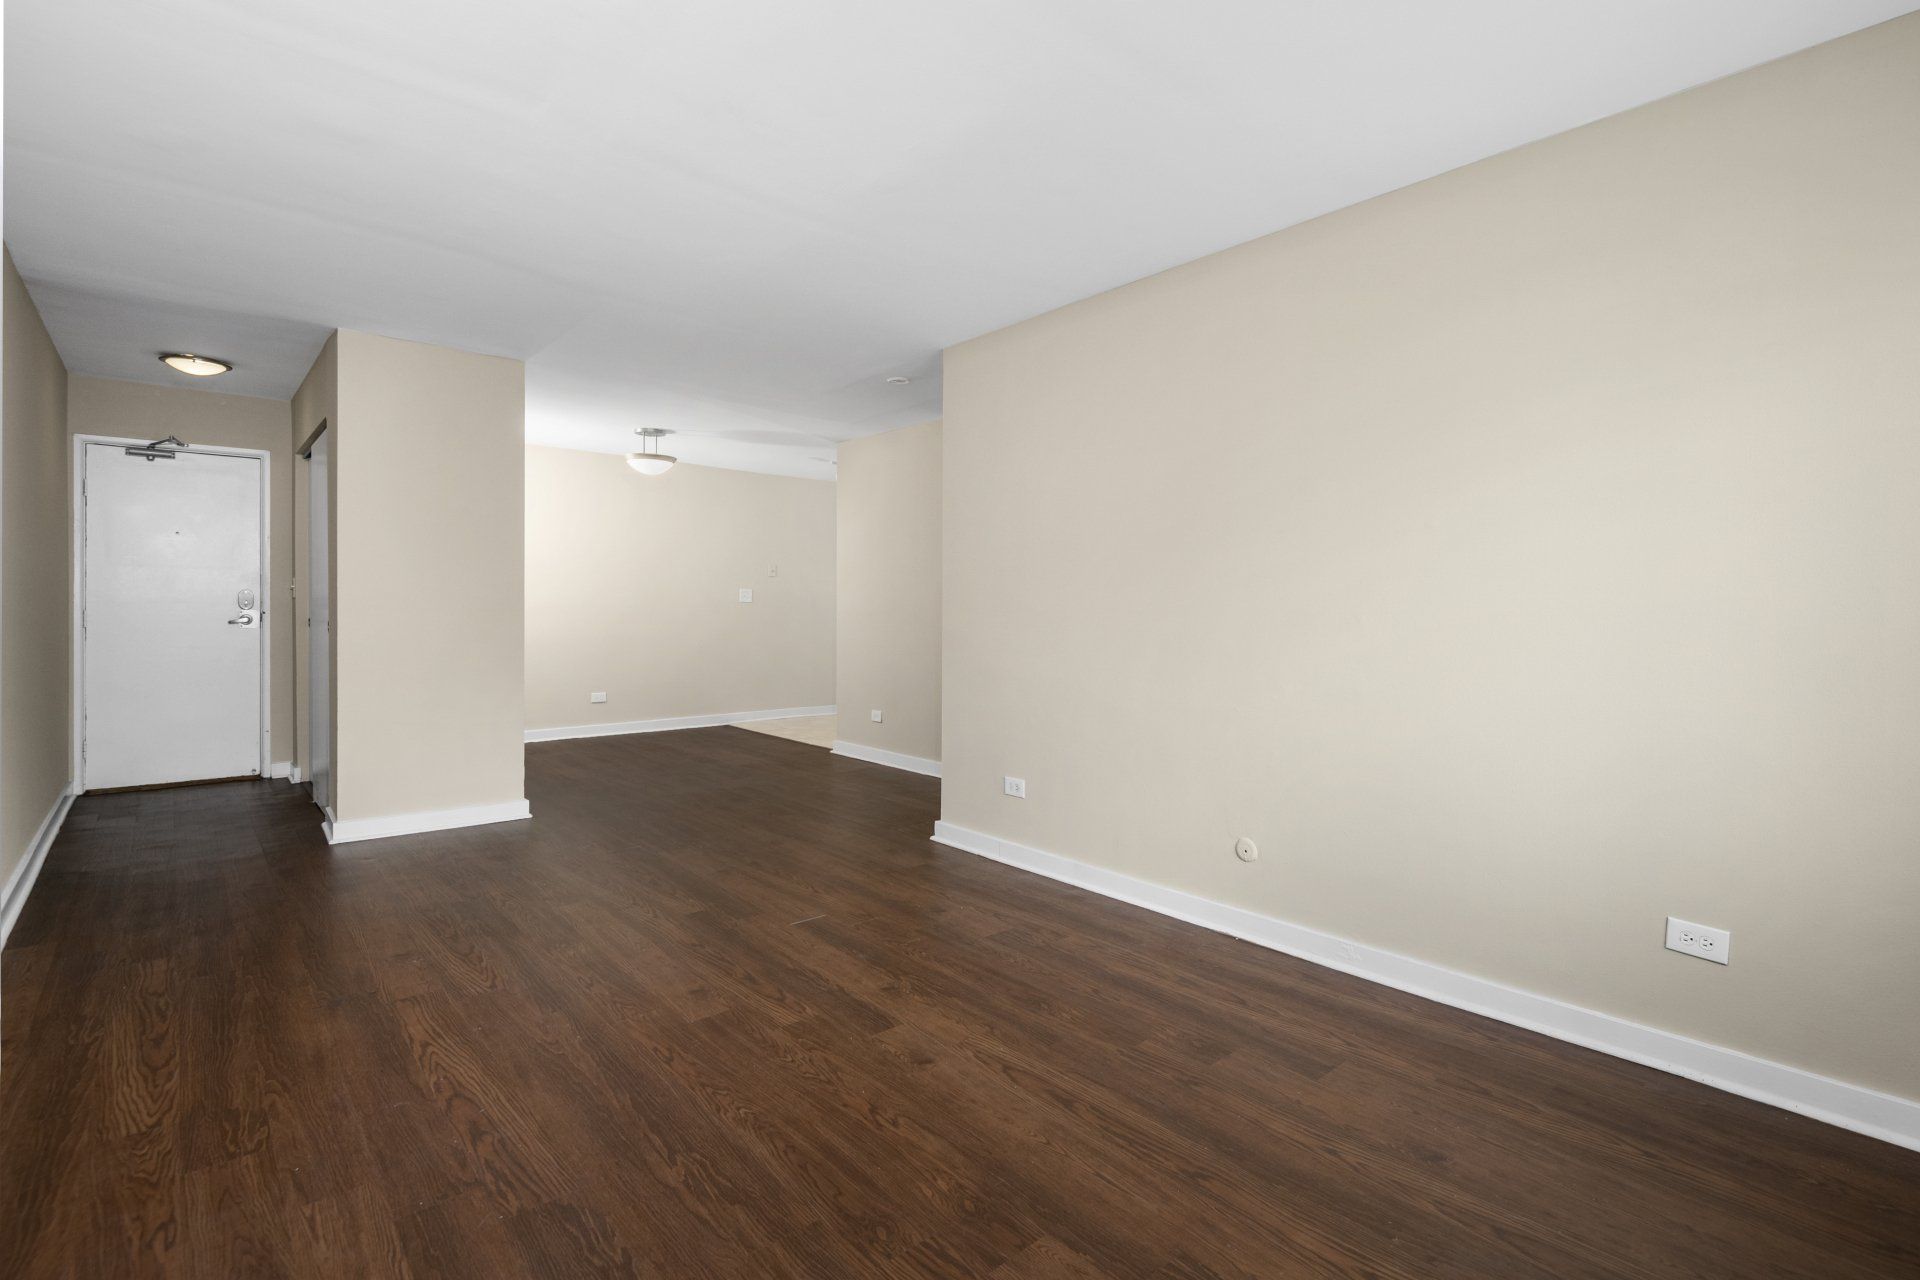 An empty living room with hardwood floors and beige walls at Reside 707.